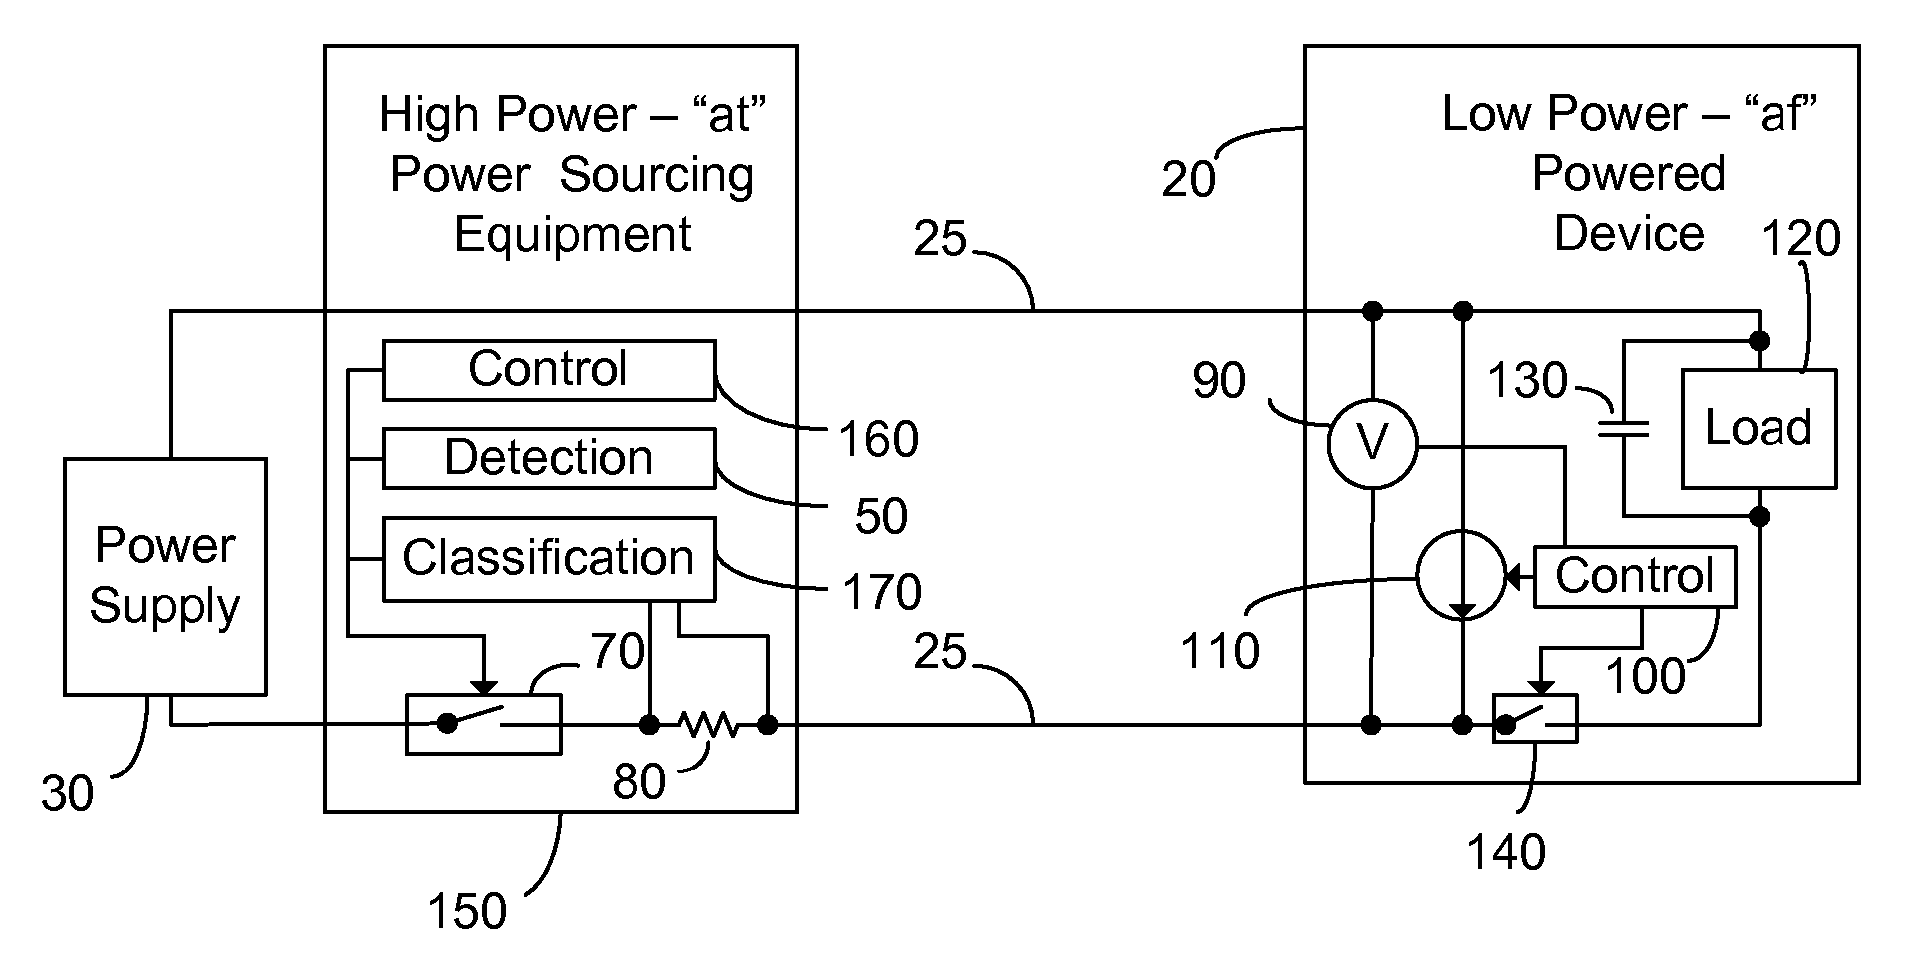 Enhanced Classification for Power Over Ethernet